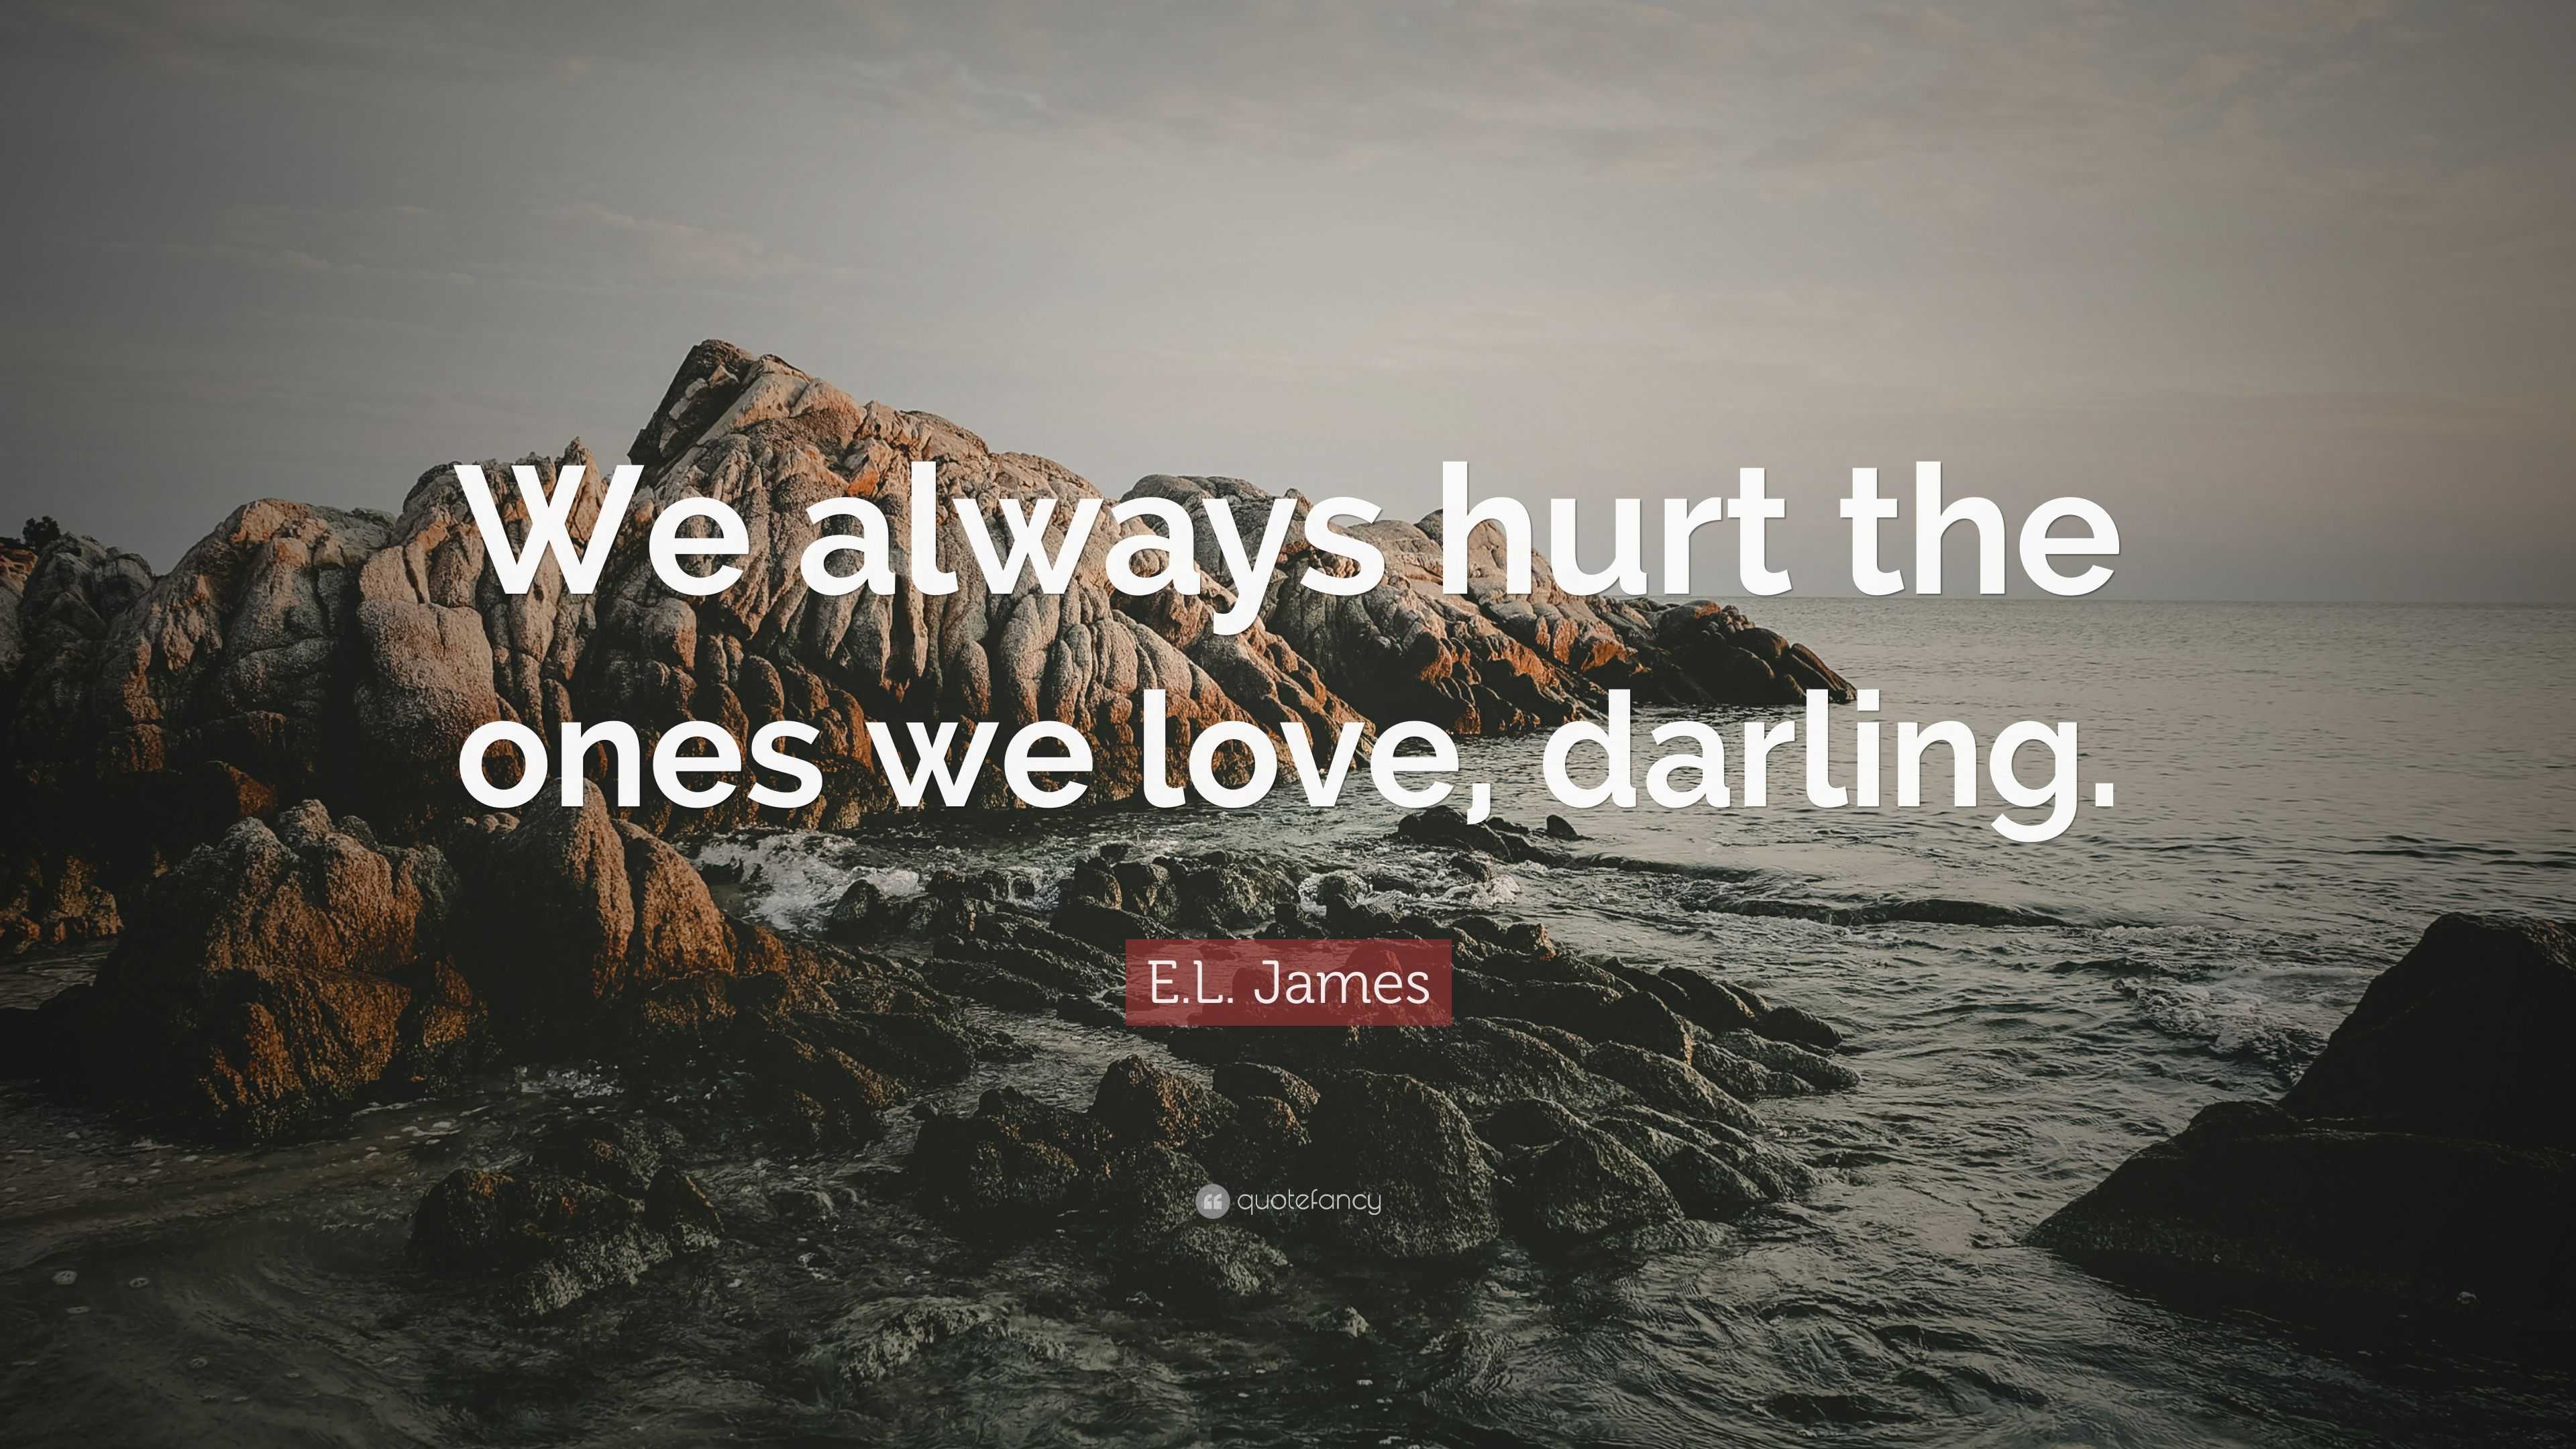 E L James Quote “We always hurt the ones we love darling ”